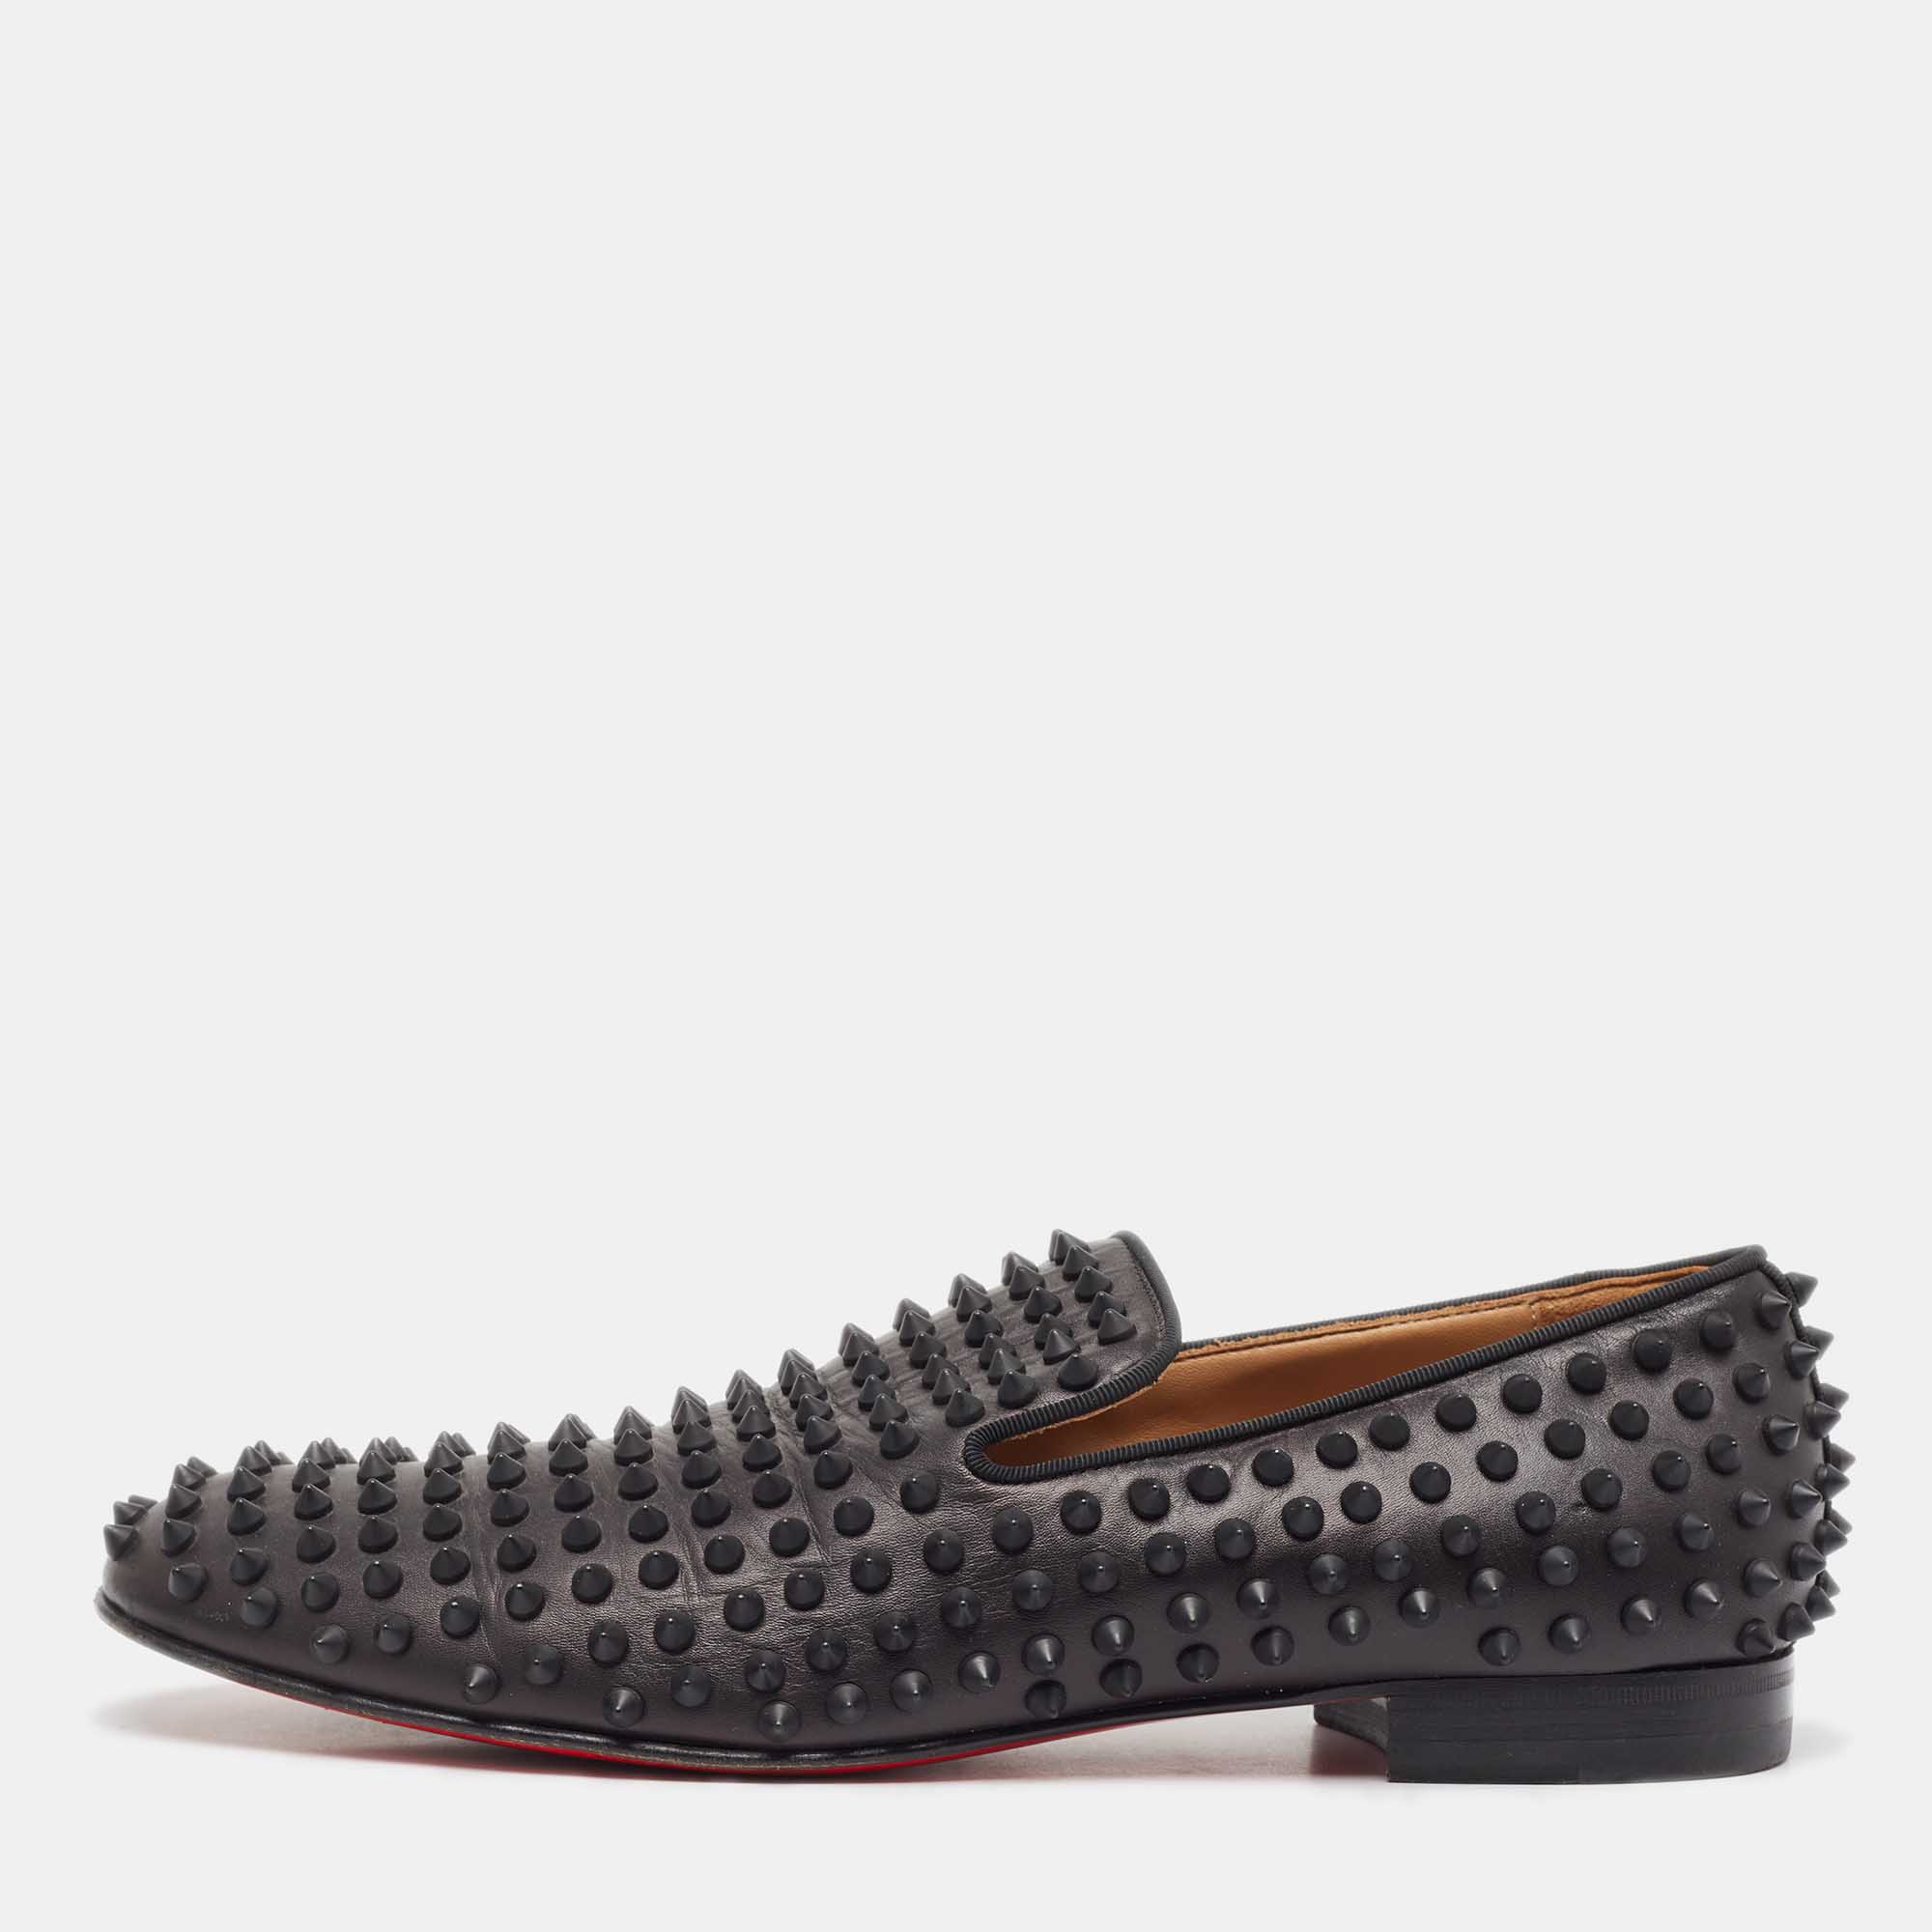 Christian louboutin louboutin louboutin black leather dandelion spikes loafers size 42.5